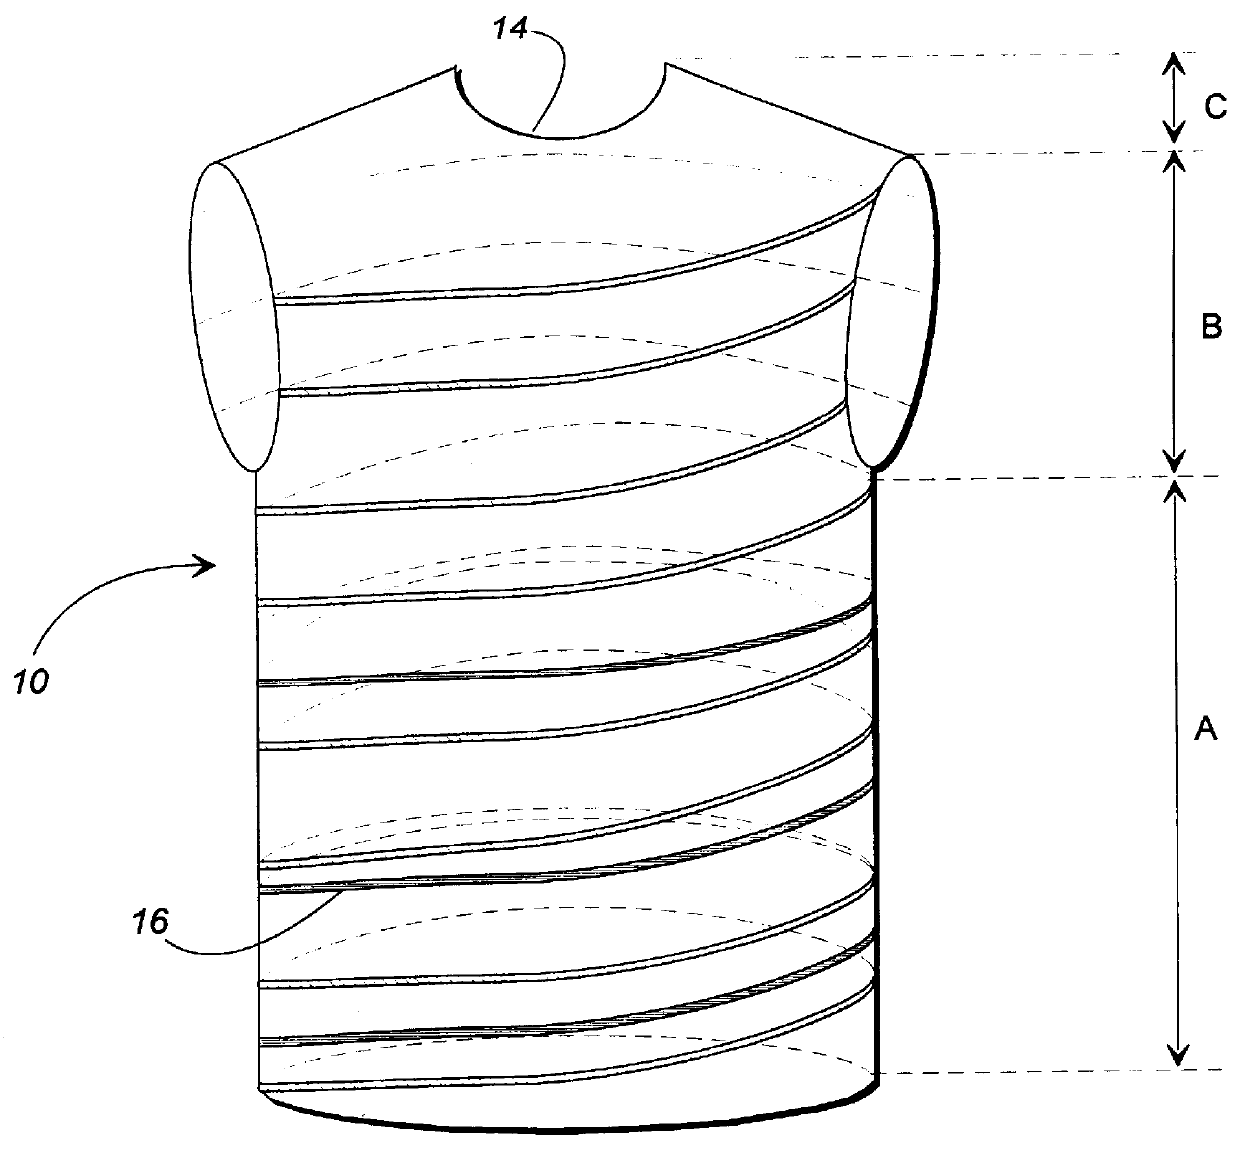 Full-fashioned weaving process for production of a woven garment with intelligence capability